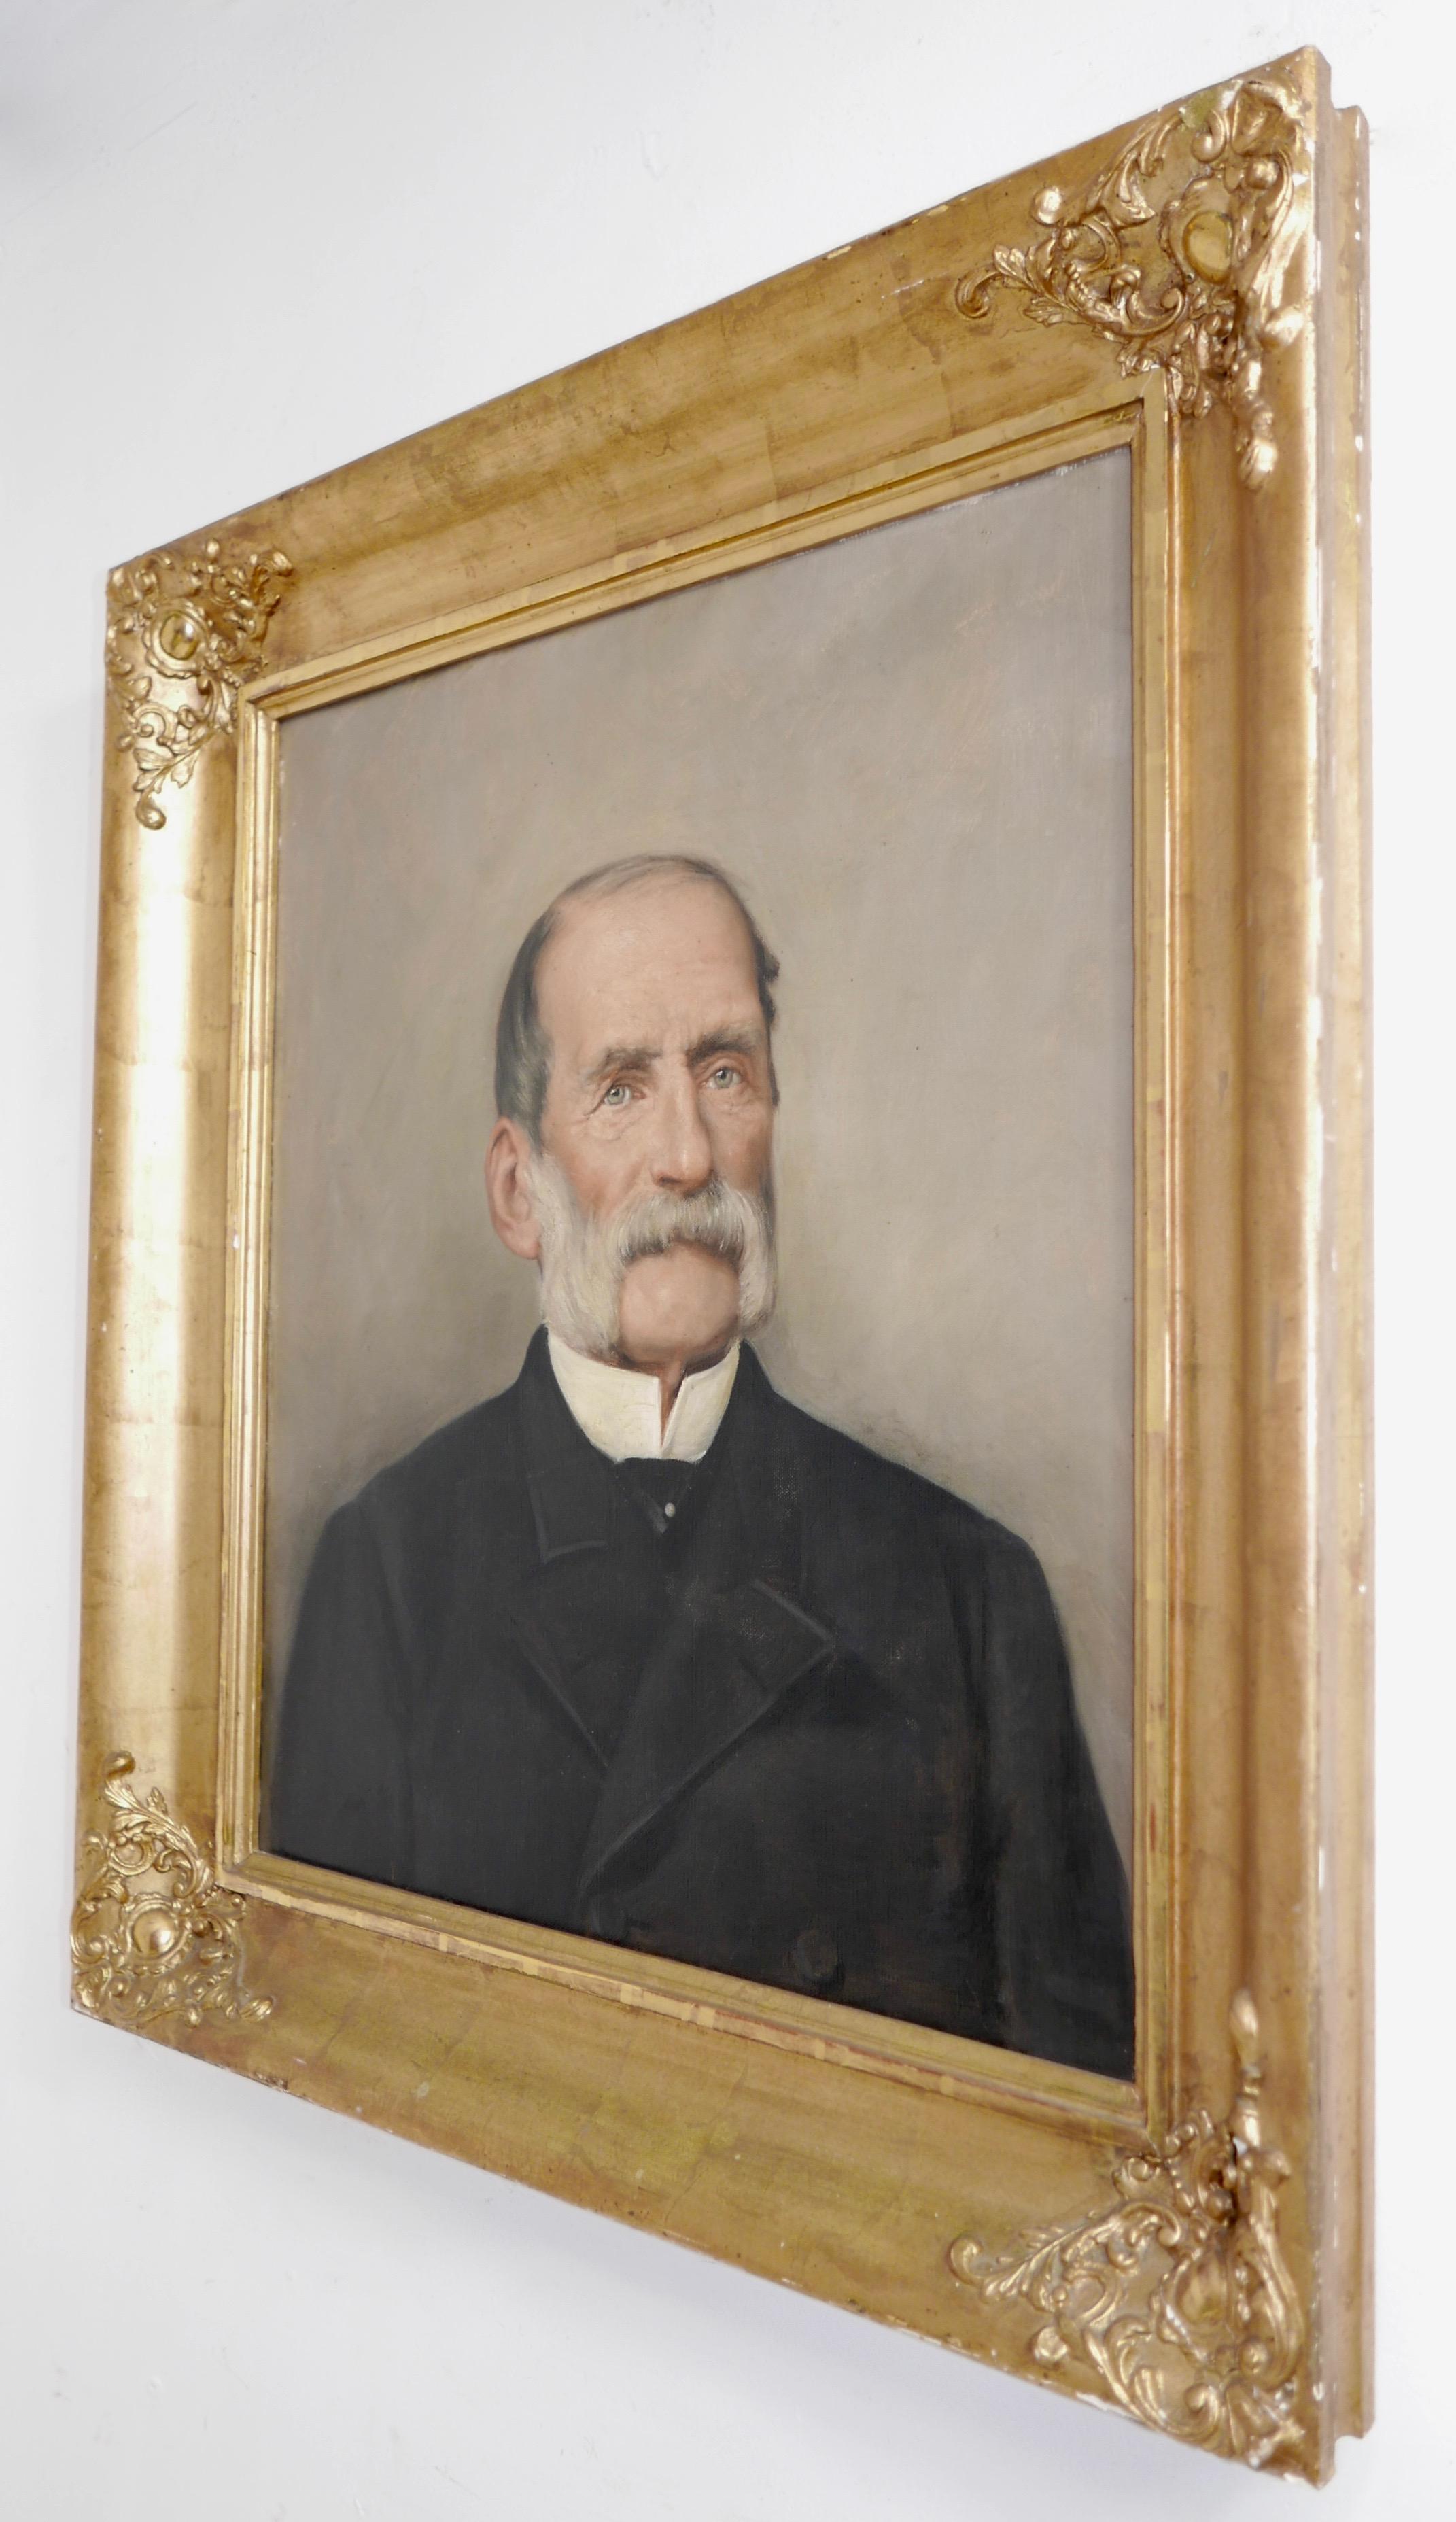 A fine portrait of a gentleman, circa 1850, oil on canvas with its original giltwood frame and stretcher
Artist and subject unknown
American School

Canvas measures: 22